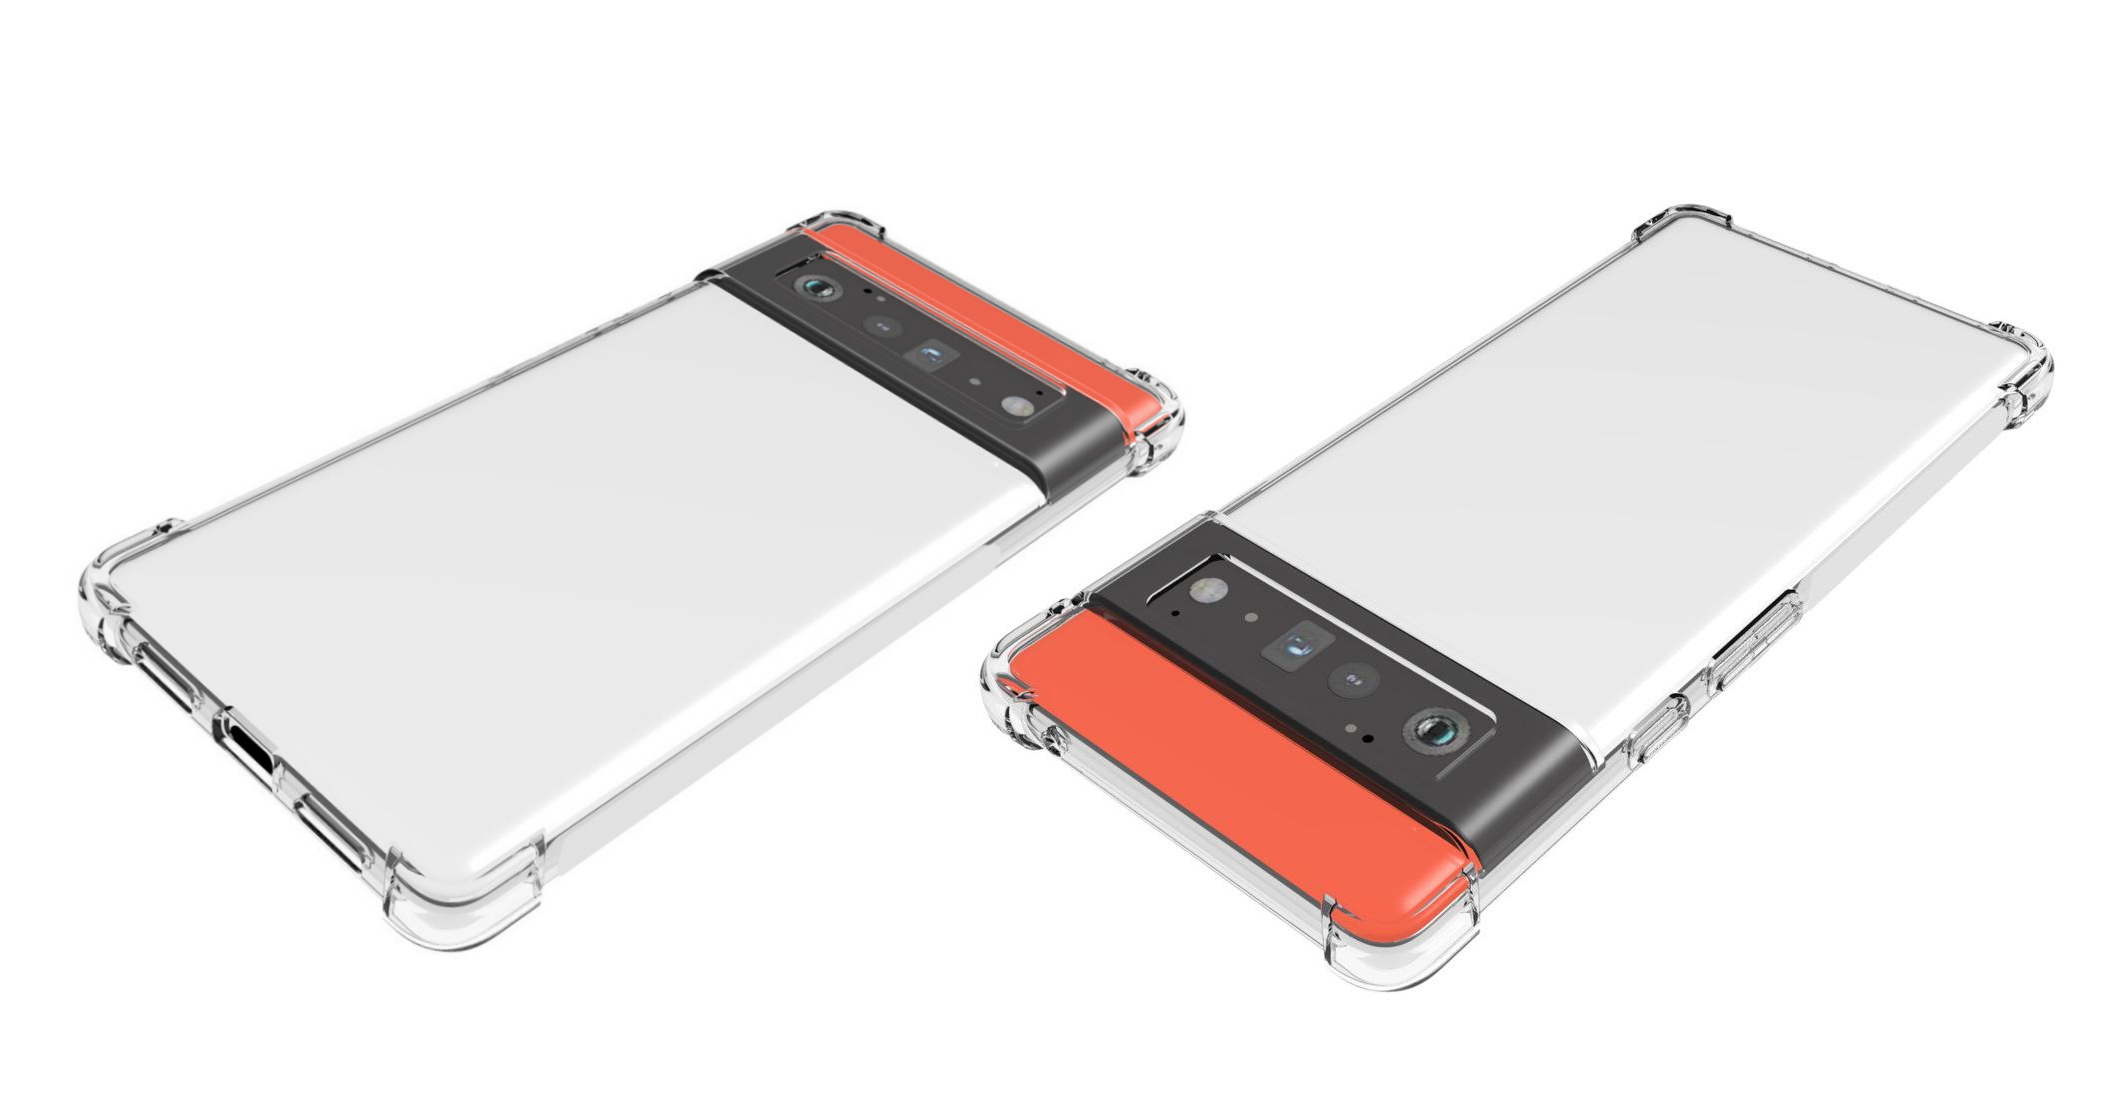 Google Pixel 6 And Pixel 6 Pro Leaked Case Designs Reaffirm The Striking Looks Of The Upcoming Flagships Notebookcheck Net News